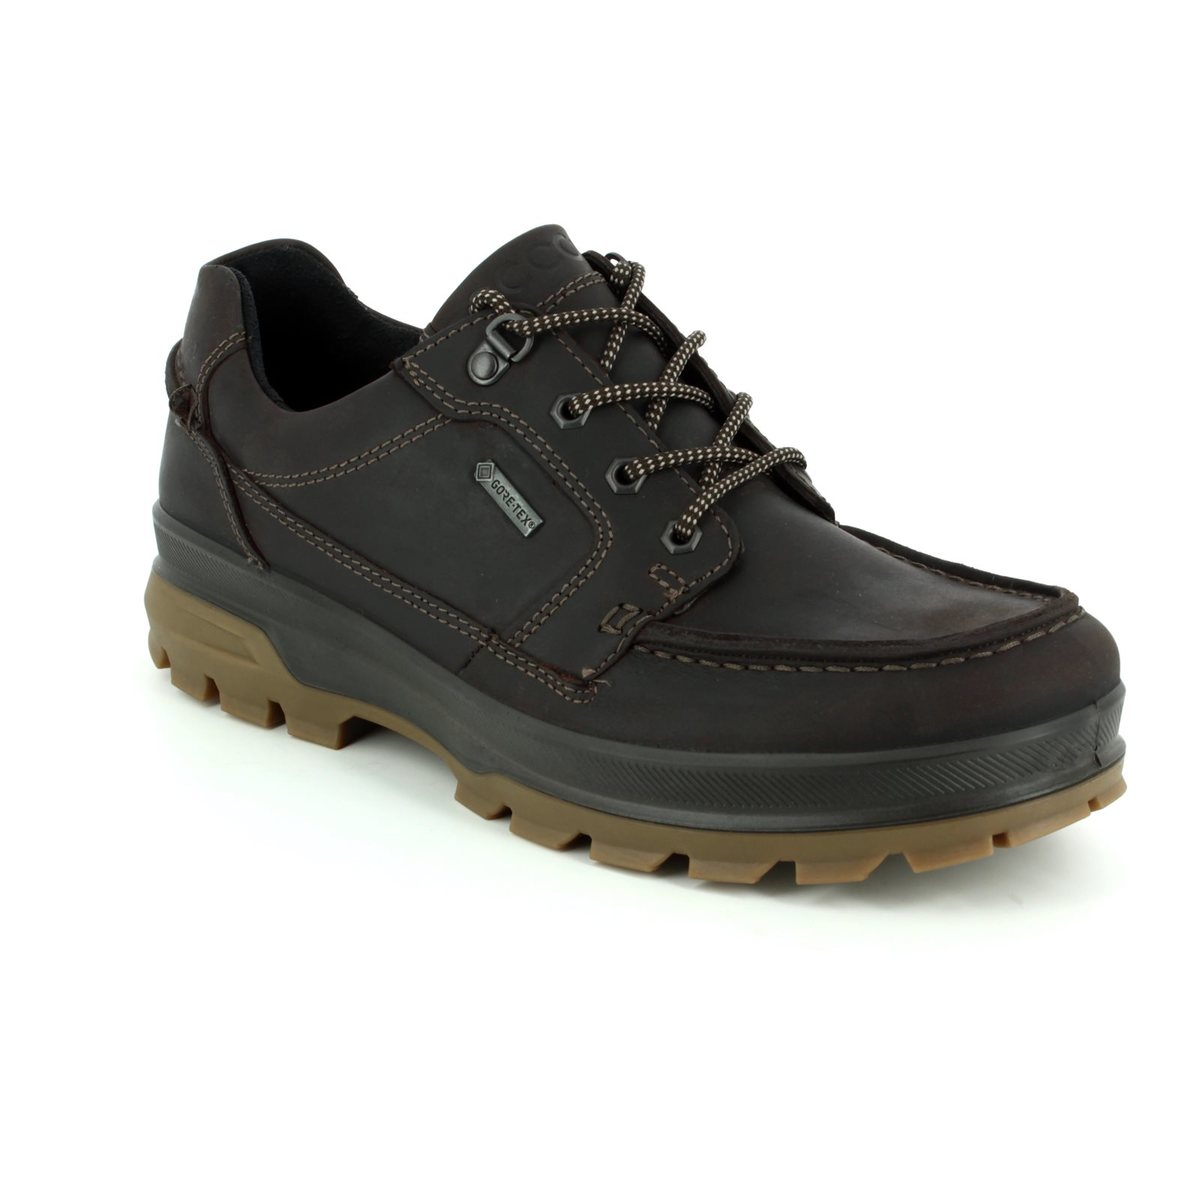 Ecco Rugged Track 1944 Gore-Tex Brown Nubuck Mens Comfort Shoes 838004-02178 In Size 41 In Plain Brown Nubuck